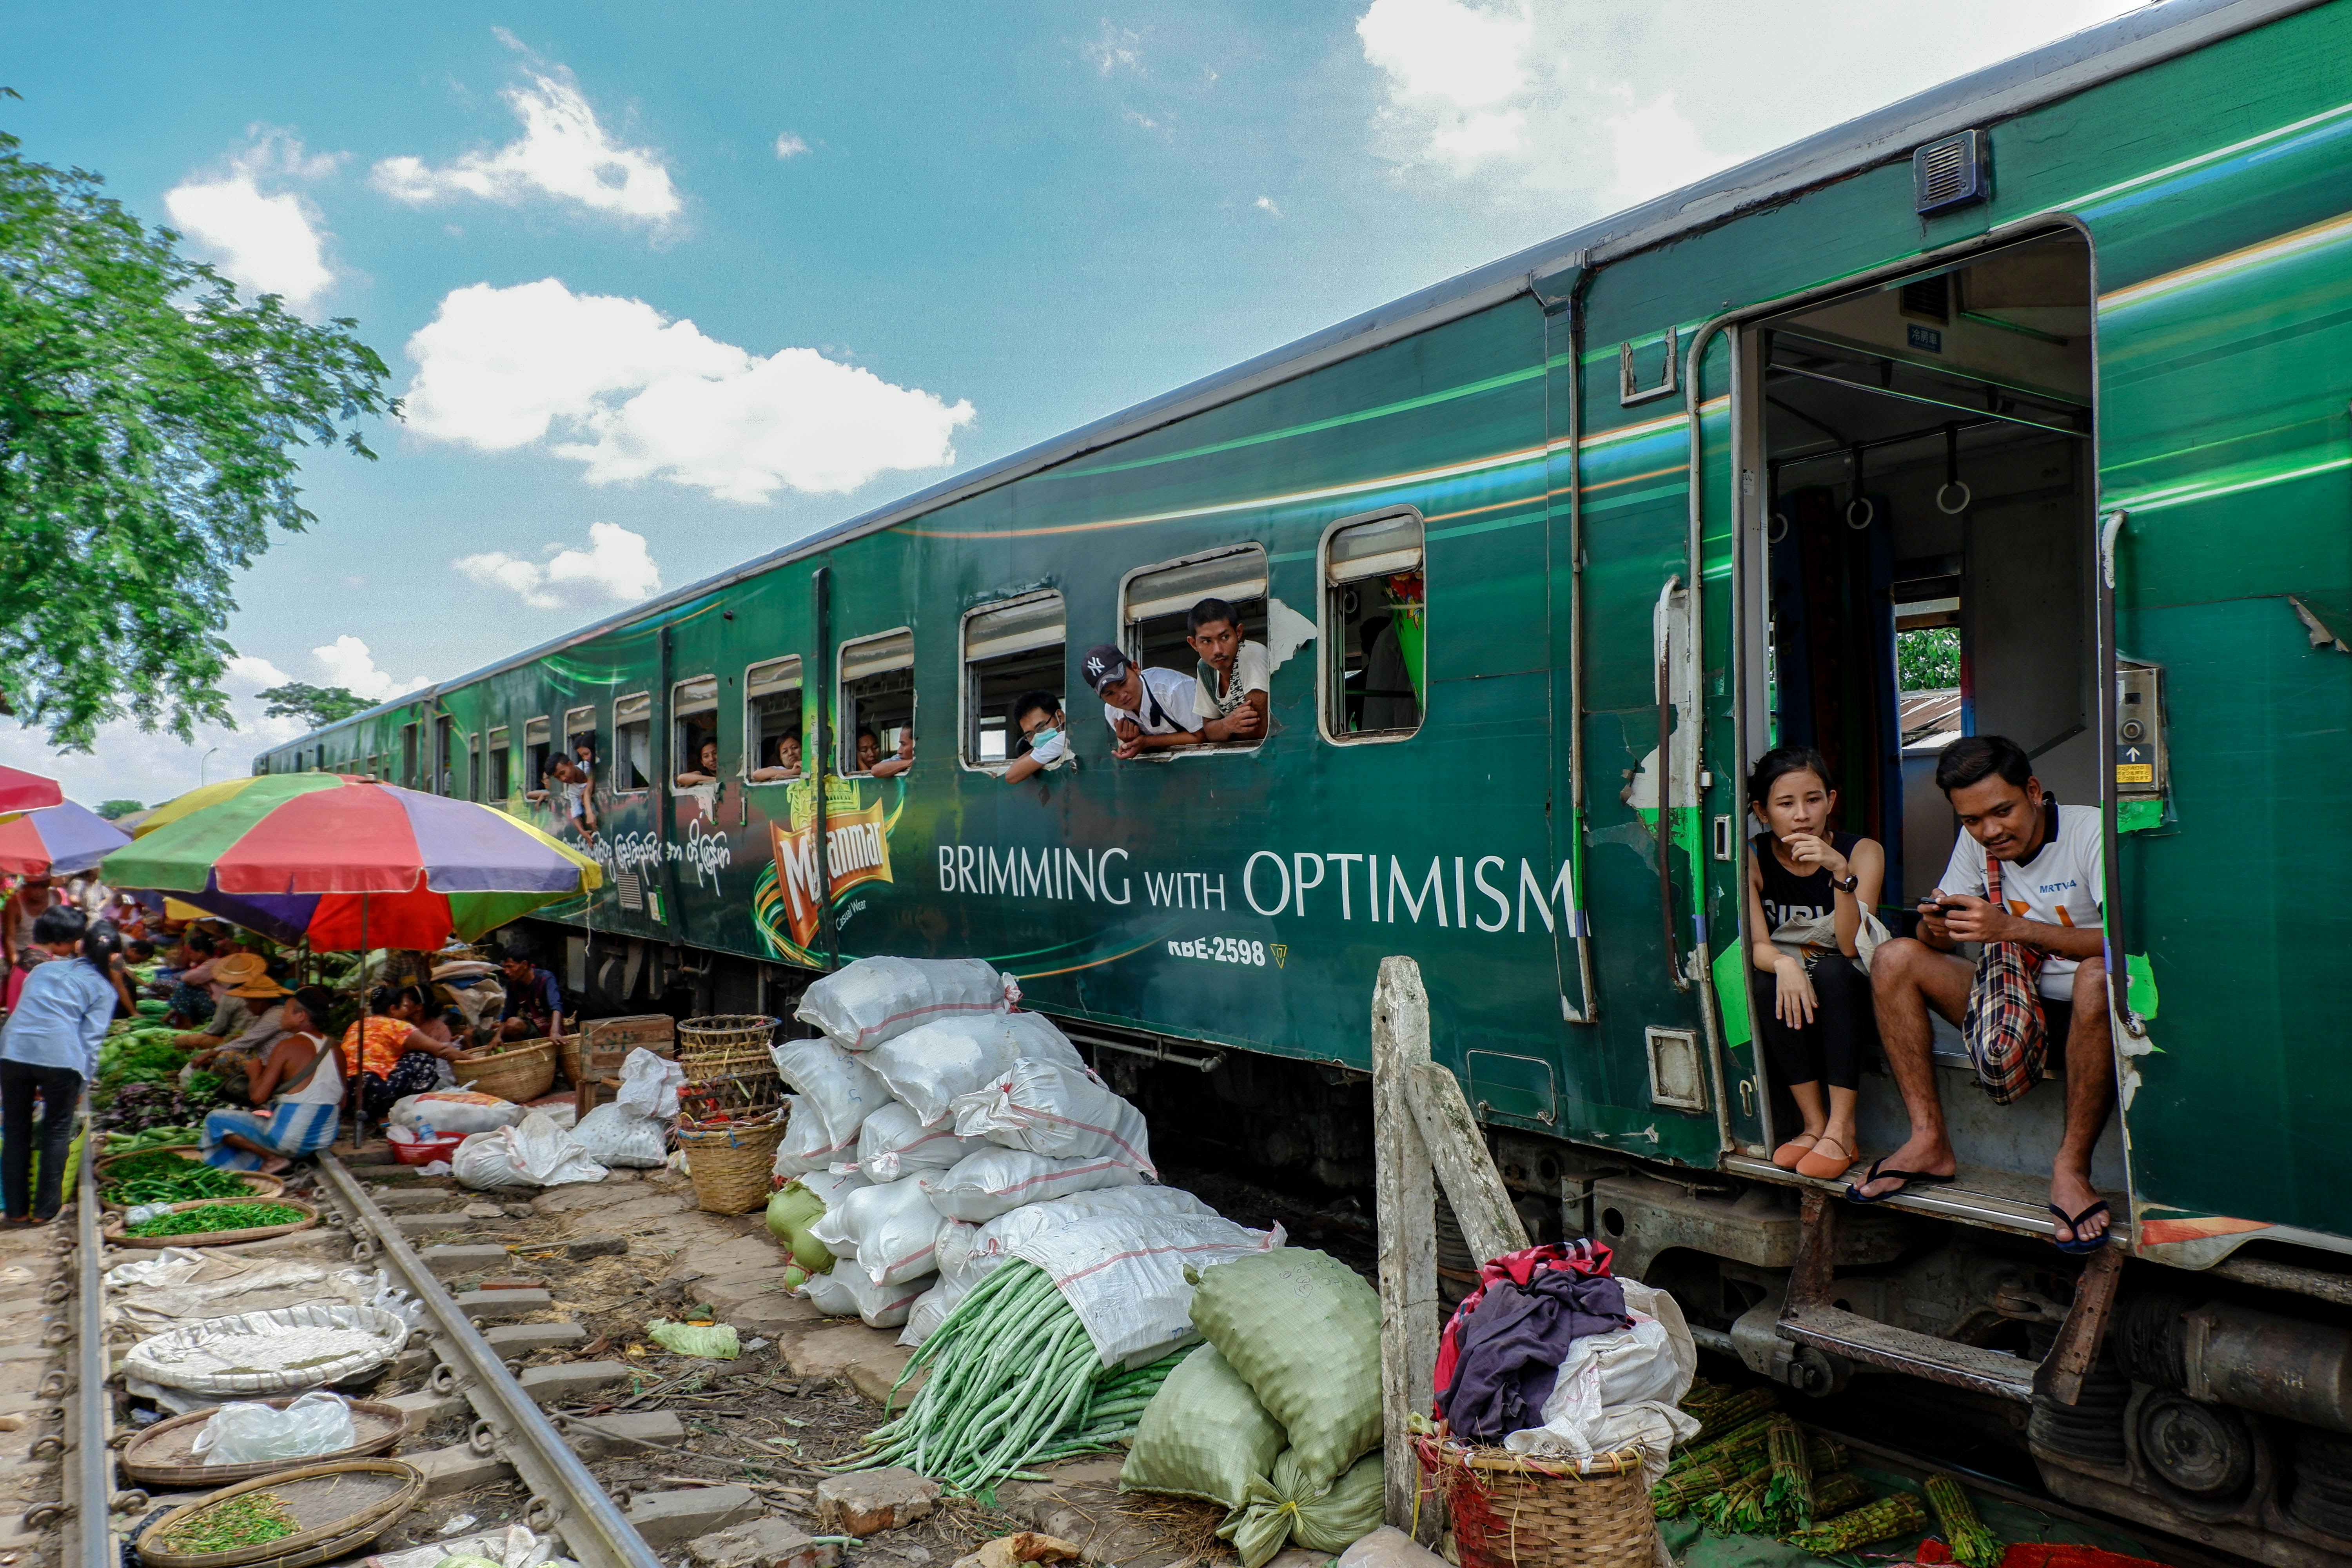 The green Yangon circle train is stationary on the tracks. Passengers are leaning out of the doors and windows to see the trackside stalls selling fresh produce.